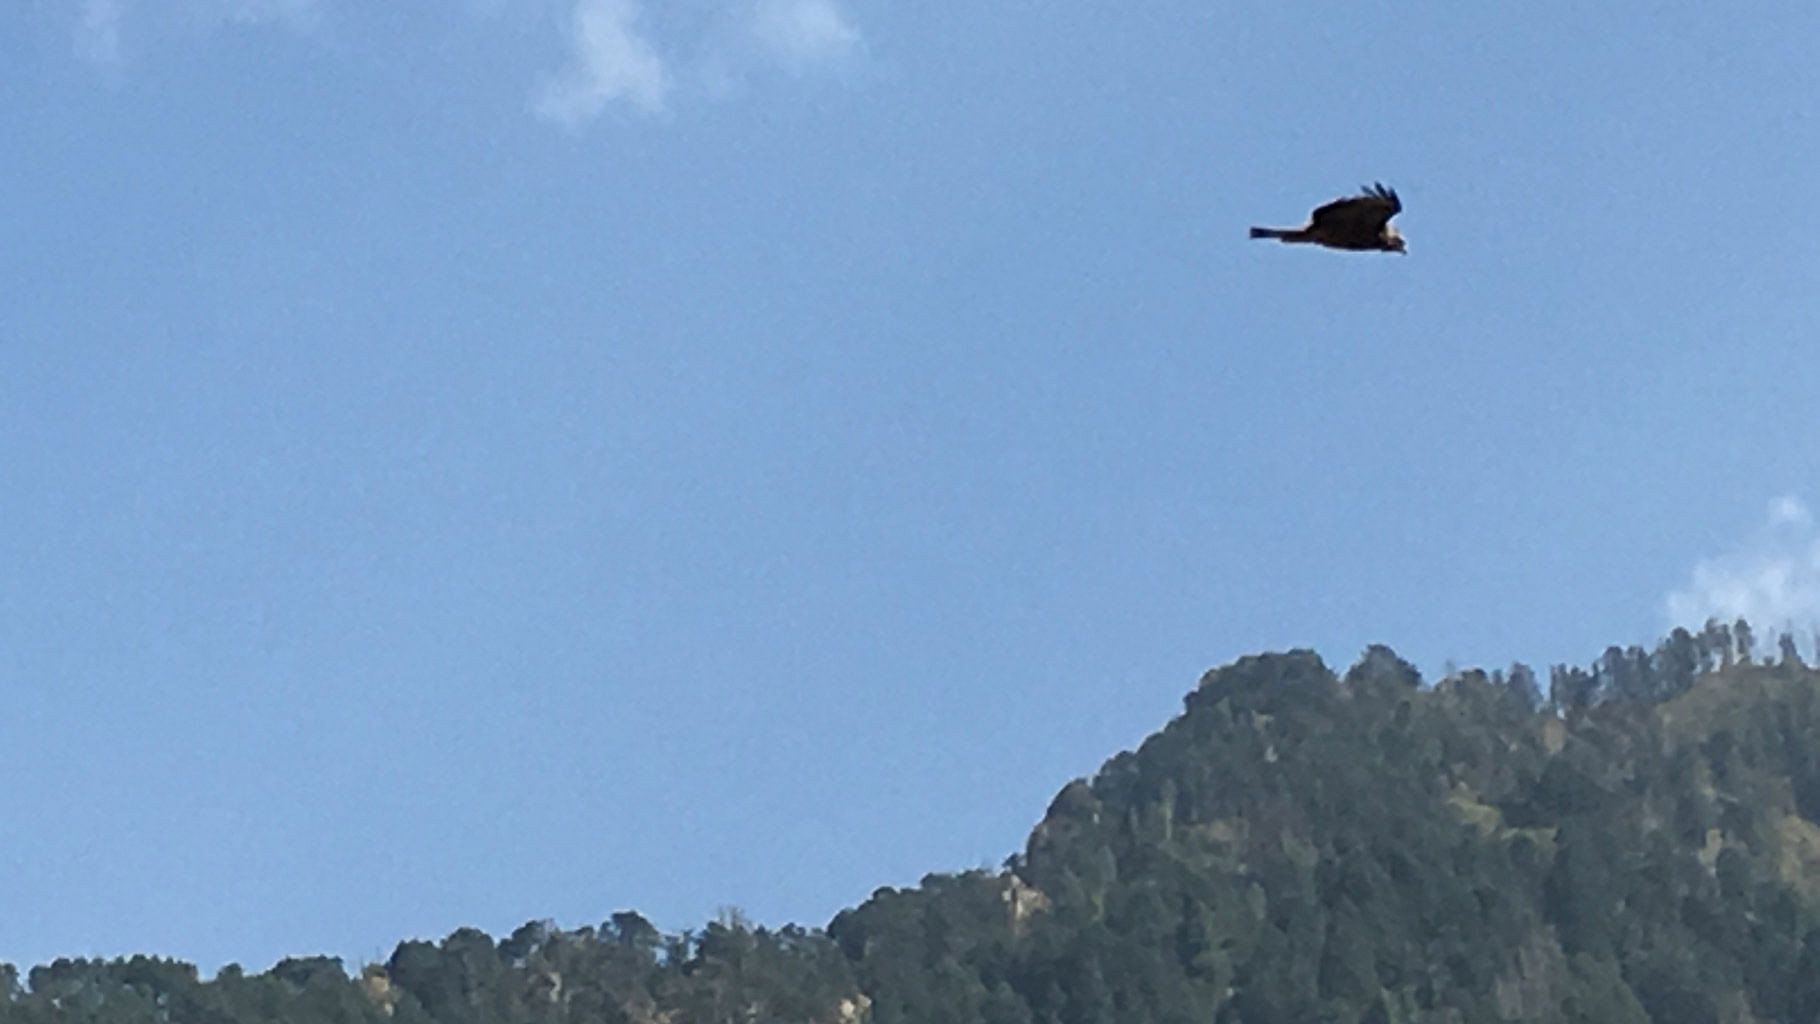 Eagle in flight over an Army outpost in Jammu and Kashmir. (Photo: <b>The Quint</b>)